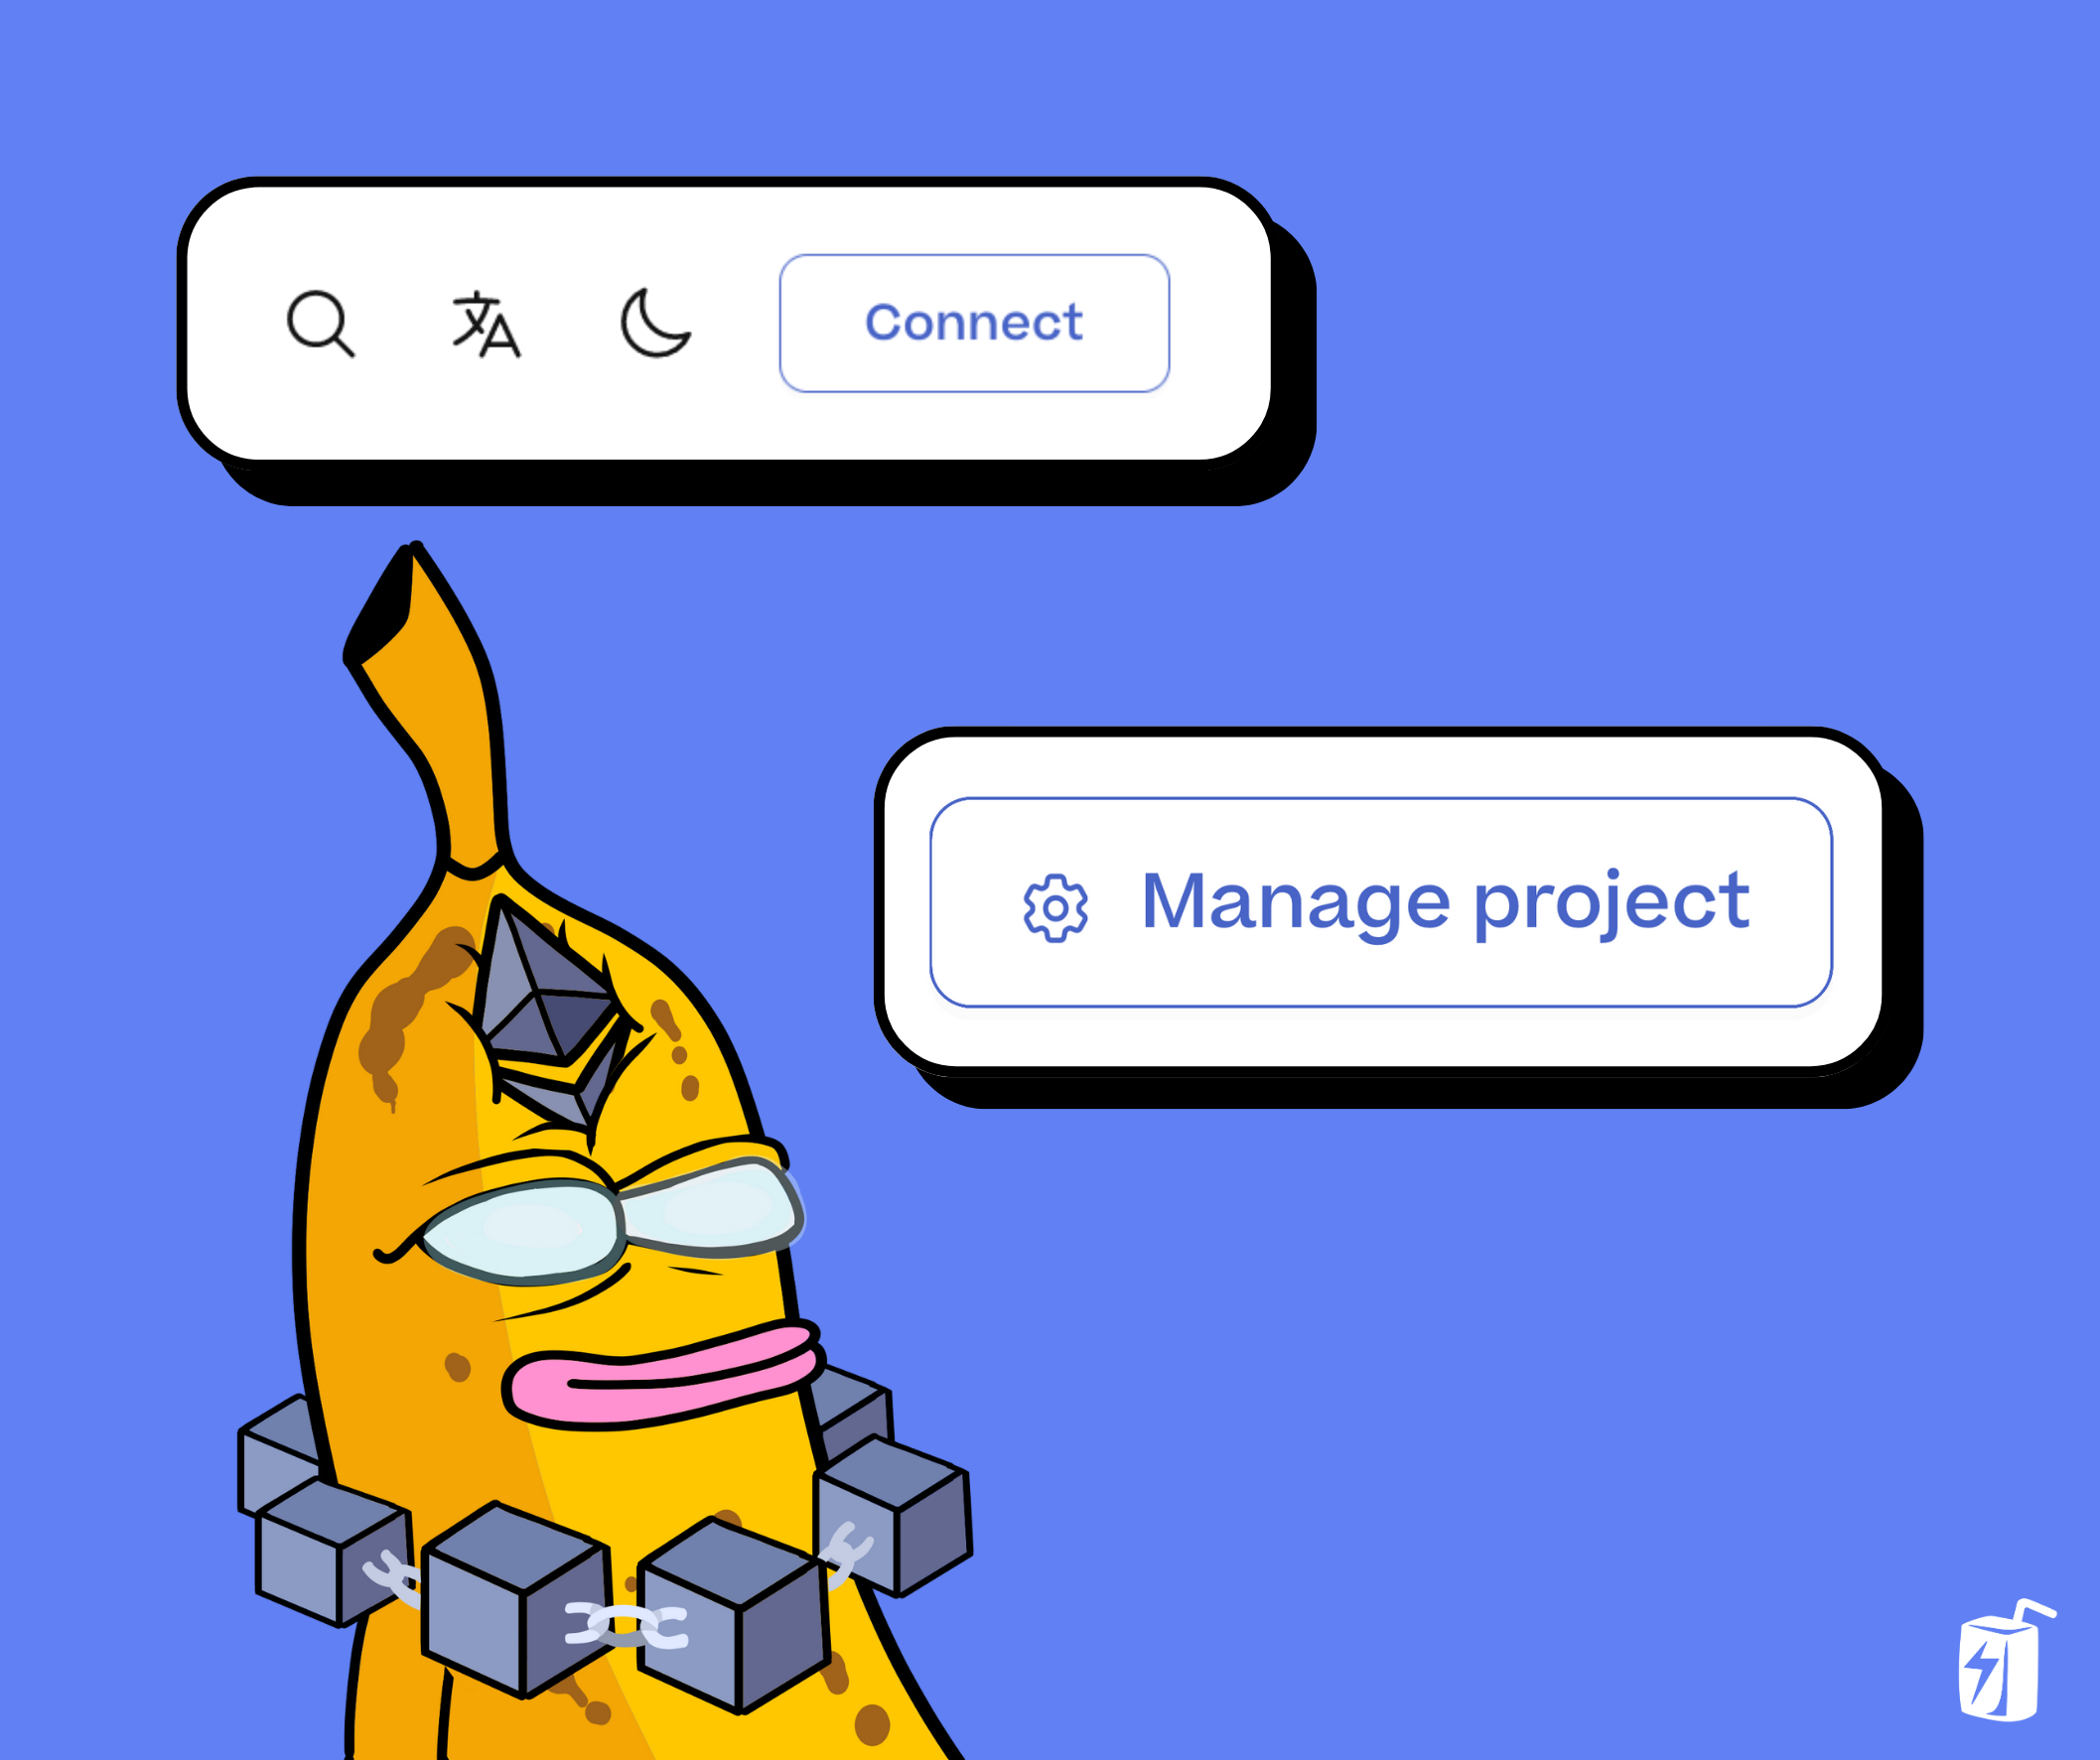 Connect wallet and click manage project